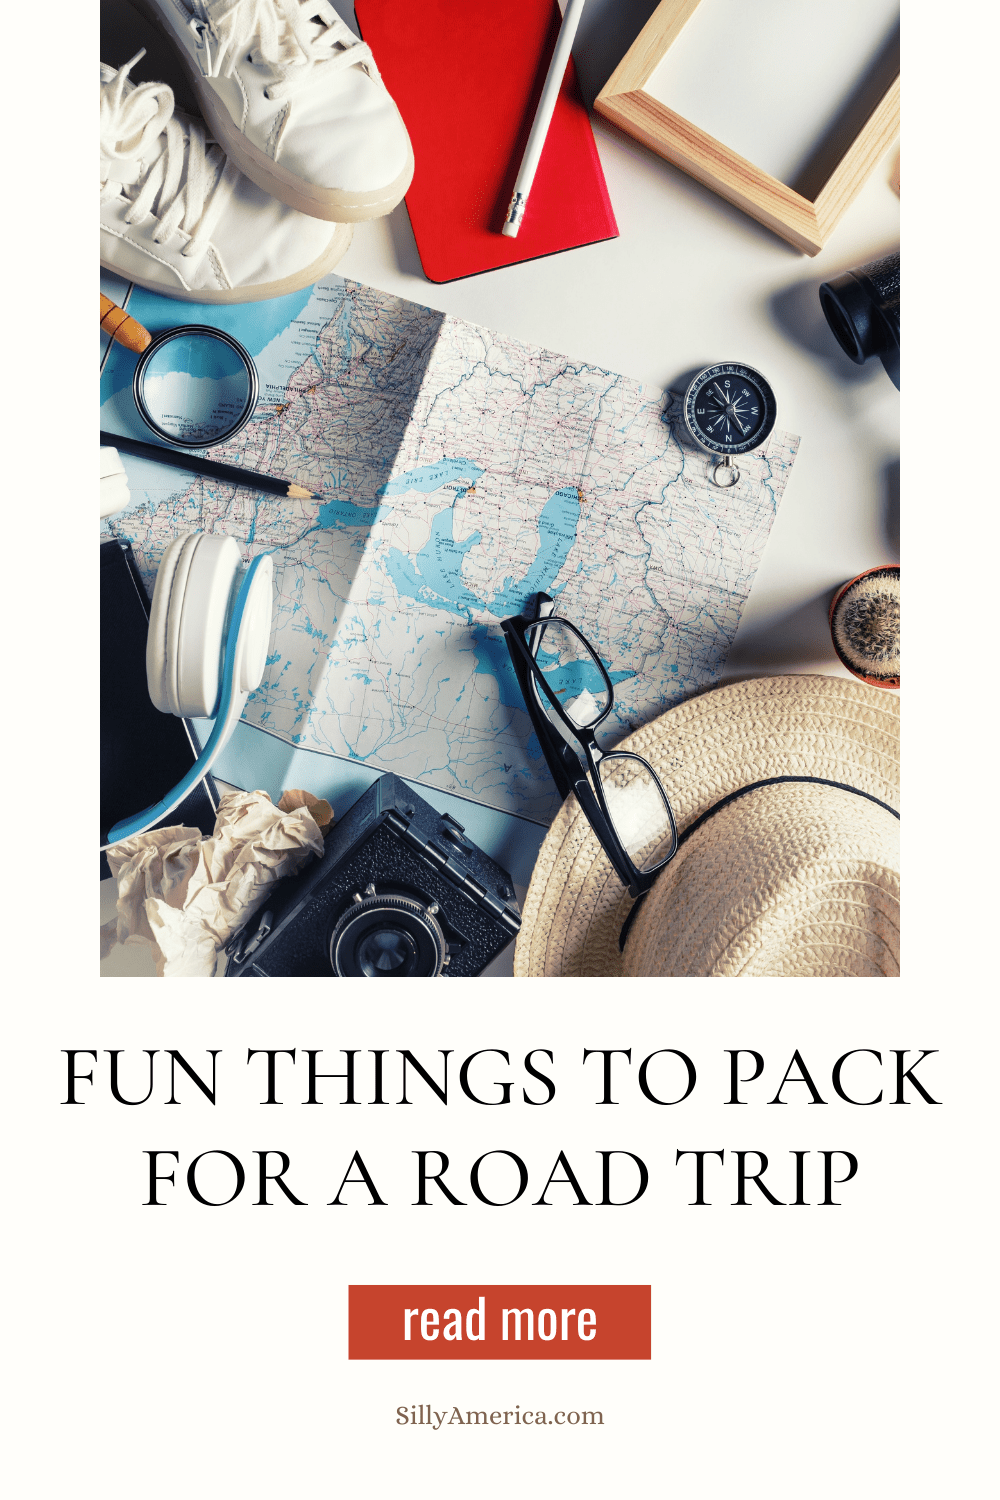 Clean underwear. An extra set of car keys. Your drivers license. There is an endless list of things you should pack for a road trip. But the key word there is should. Sure, you should always pack a car emergency kit, but what are some fun things to pack on a road trip? Things that make the drive easier, your photos more interesting, and your vacation more relaxing? #RoadTrip #RoadTripPlanning #RoadTripPacking #PackingList #Travel #TravelPacking